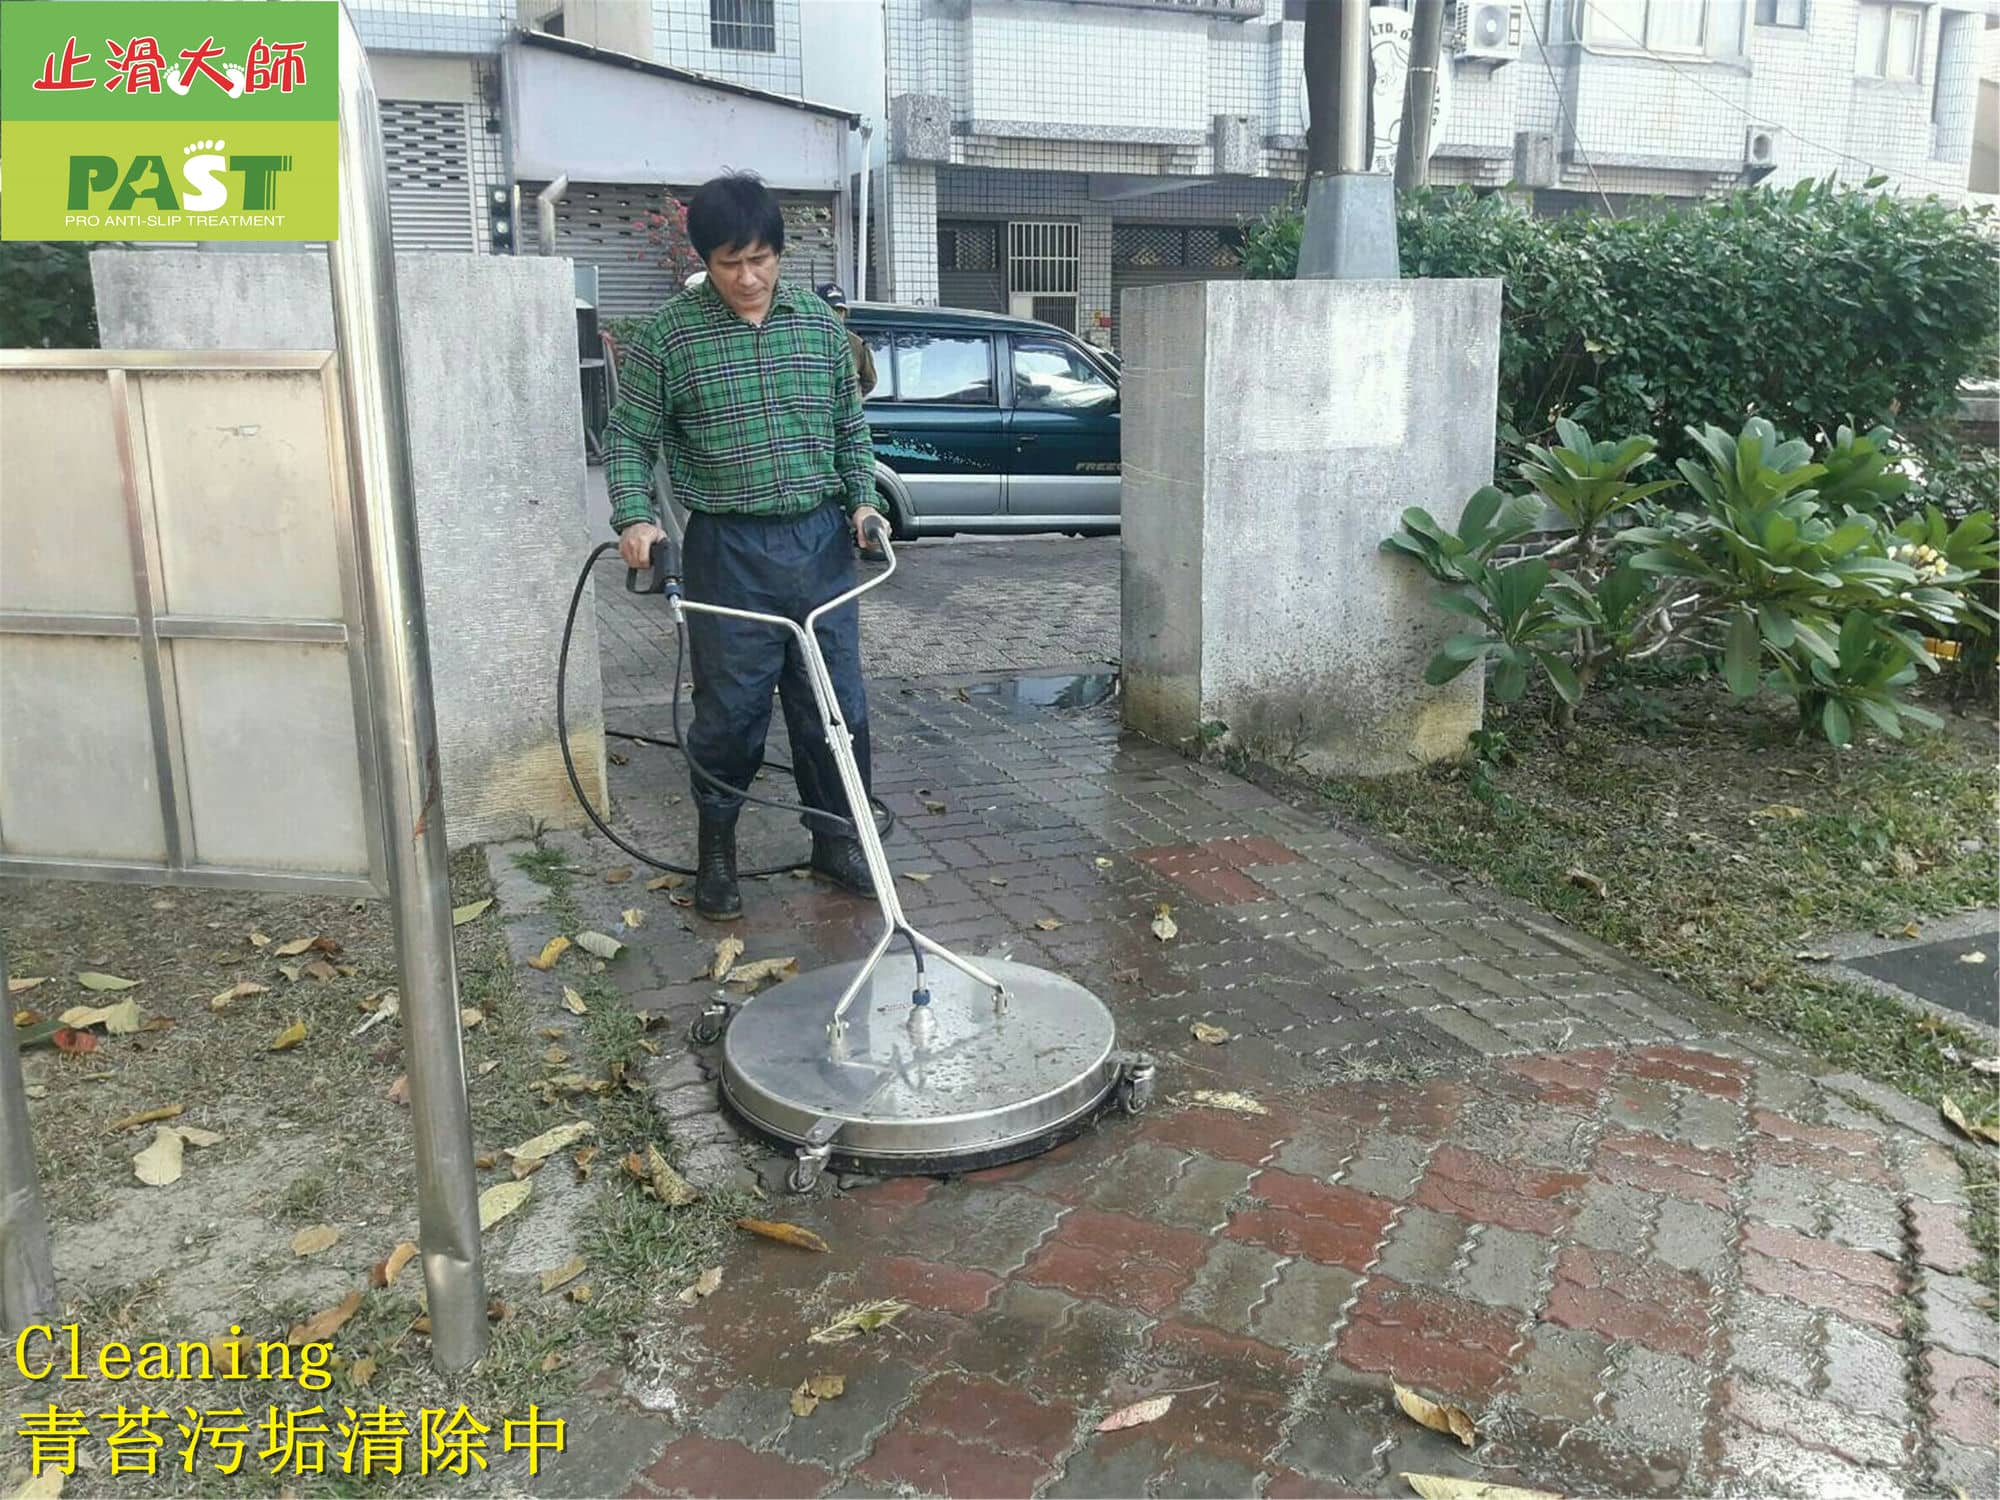 moss cleaning